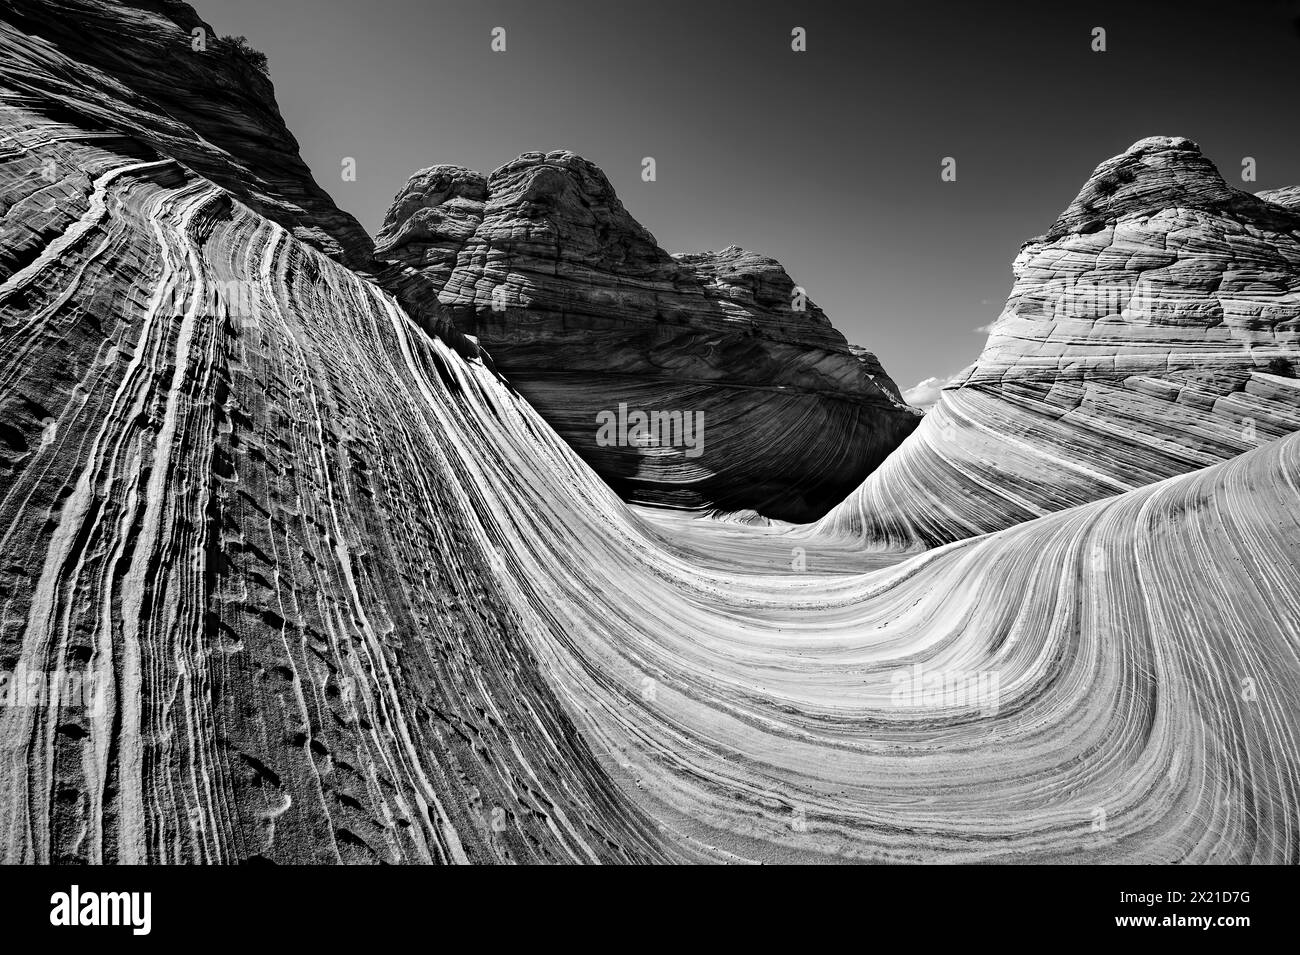 Banded sandstone forms a wave, The Wave, Coyote Buttes, Paria Canyon, Vermillion Cliffs, Kanab, Arizona, USA, North America Stock Photo